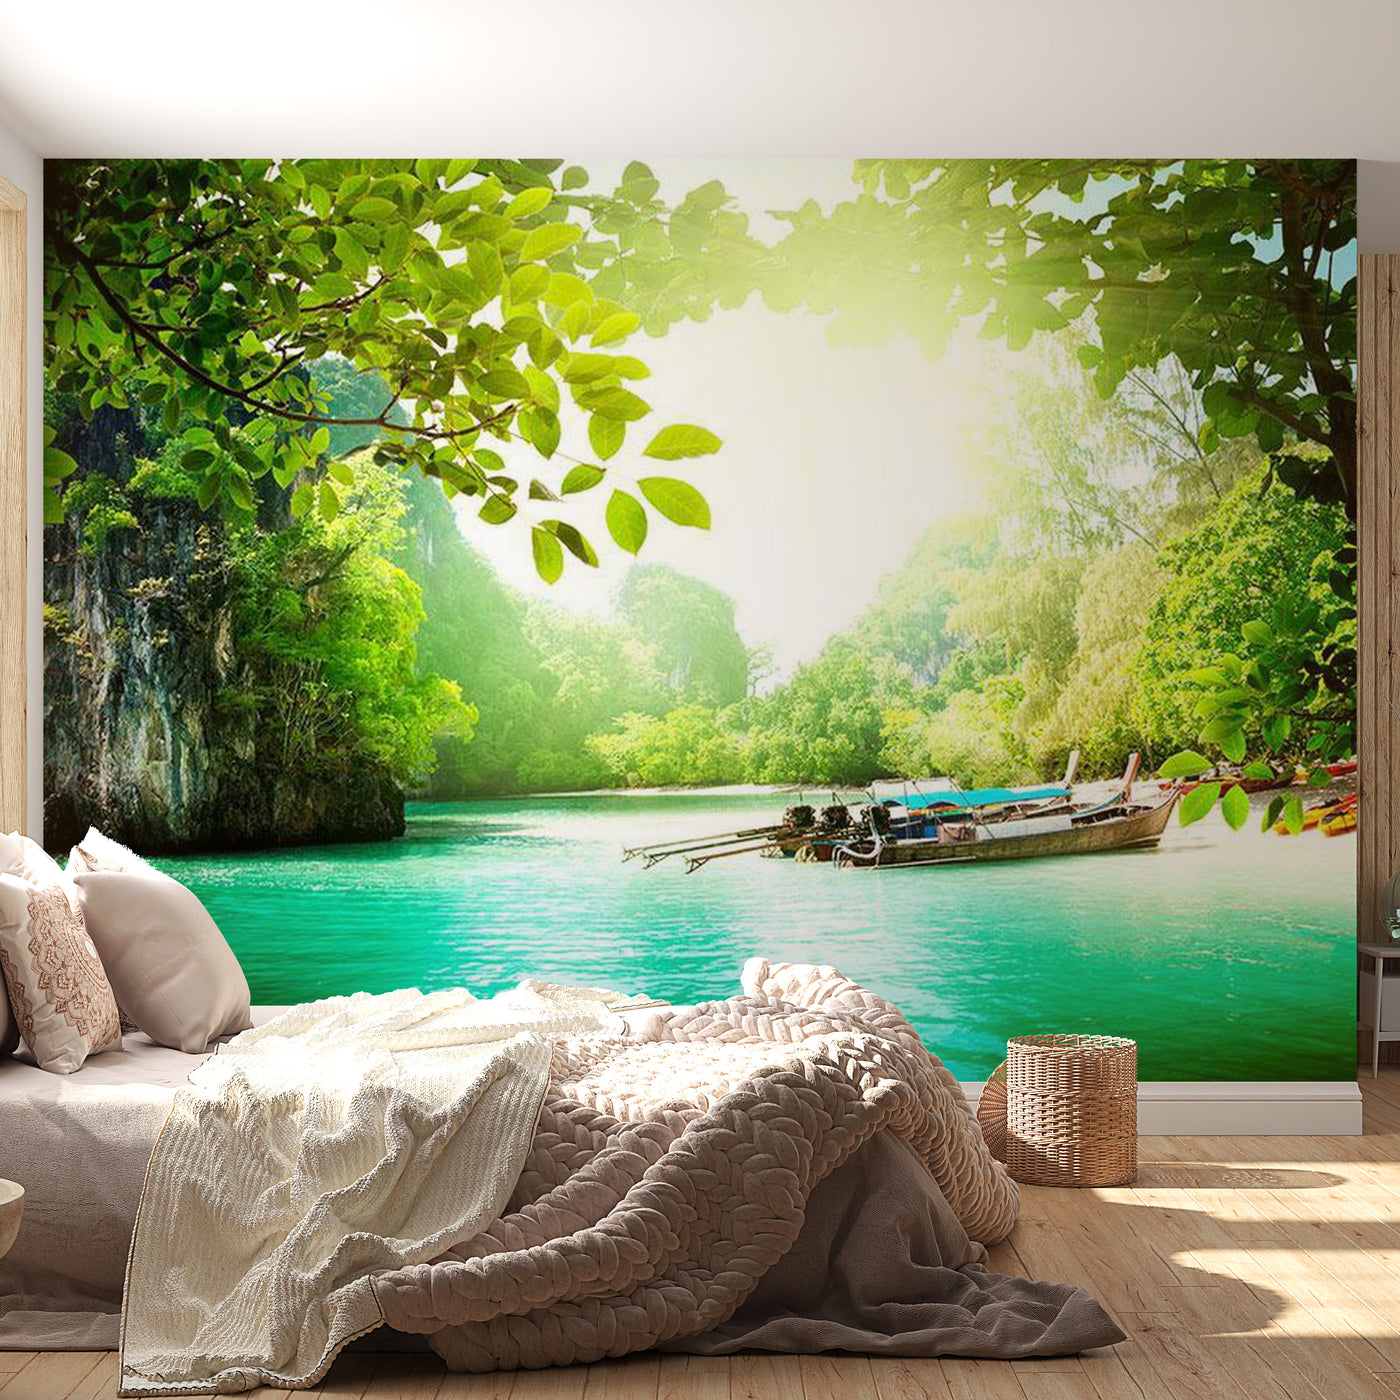 Peel & Stick Nature Wall Mural - Secret Paradise - Removable Wall Decals